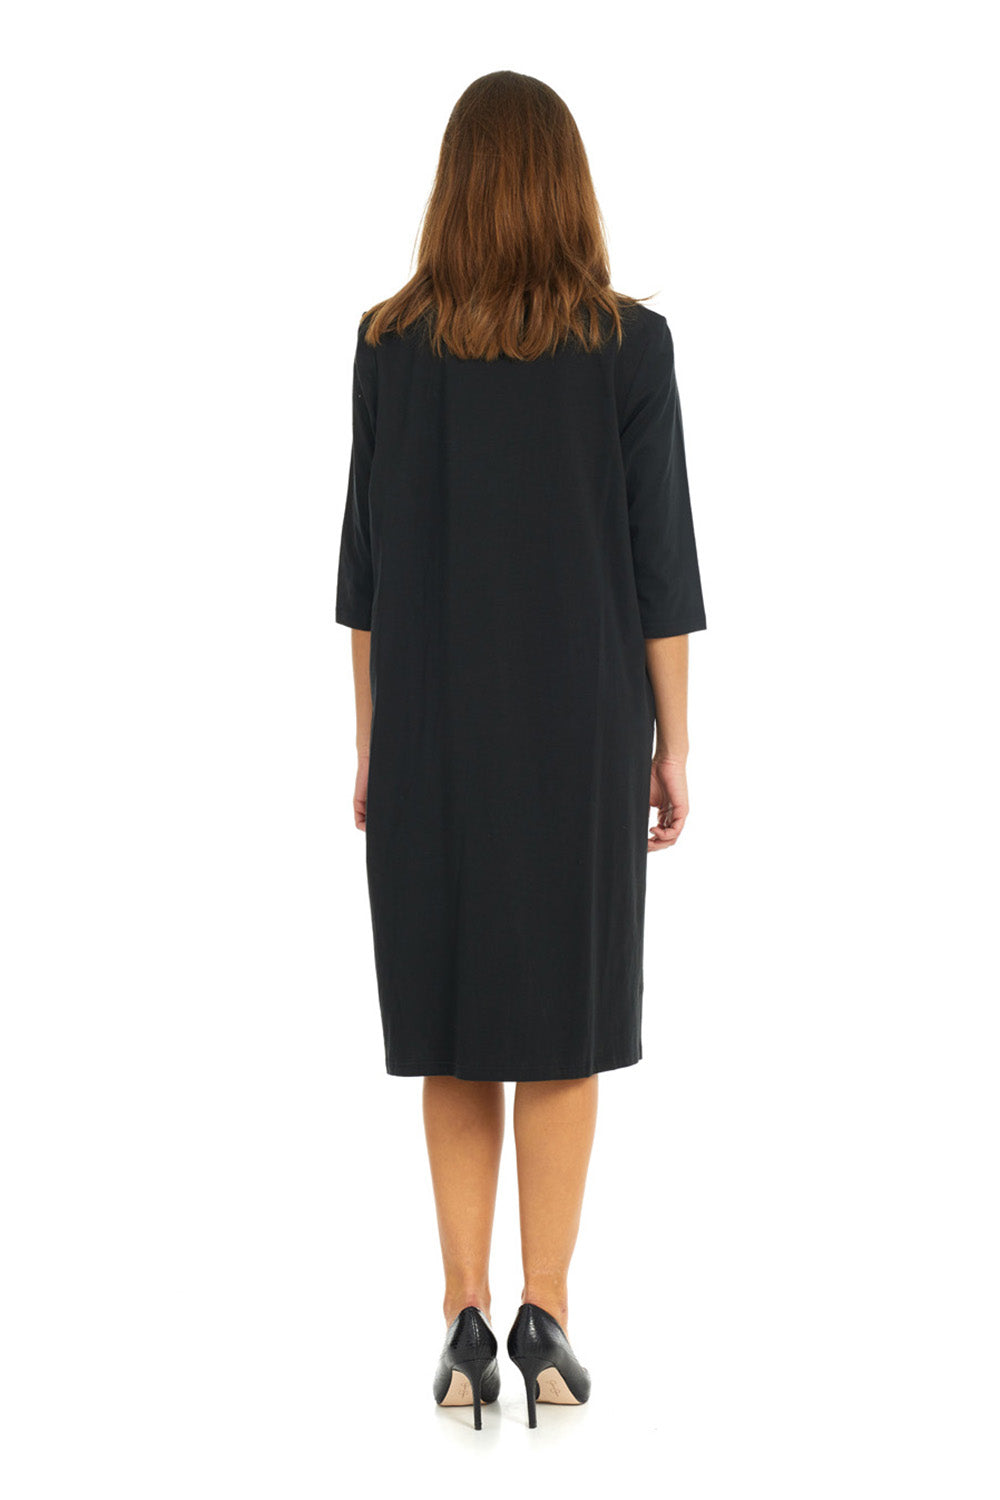 Soft and comfy cotton black t-shirt dress with pockets. modest 3/4 sleeves and knee length